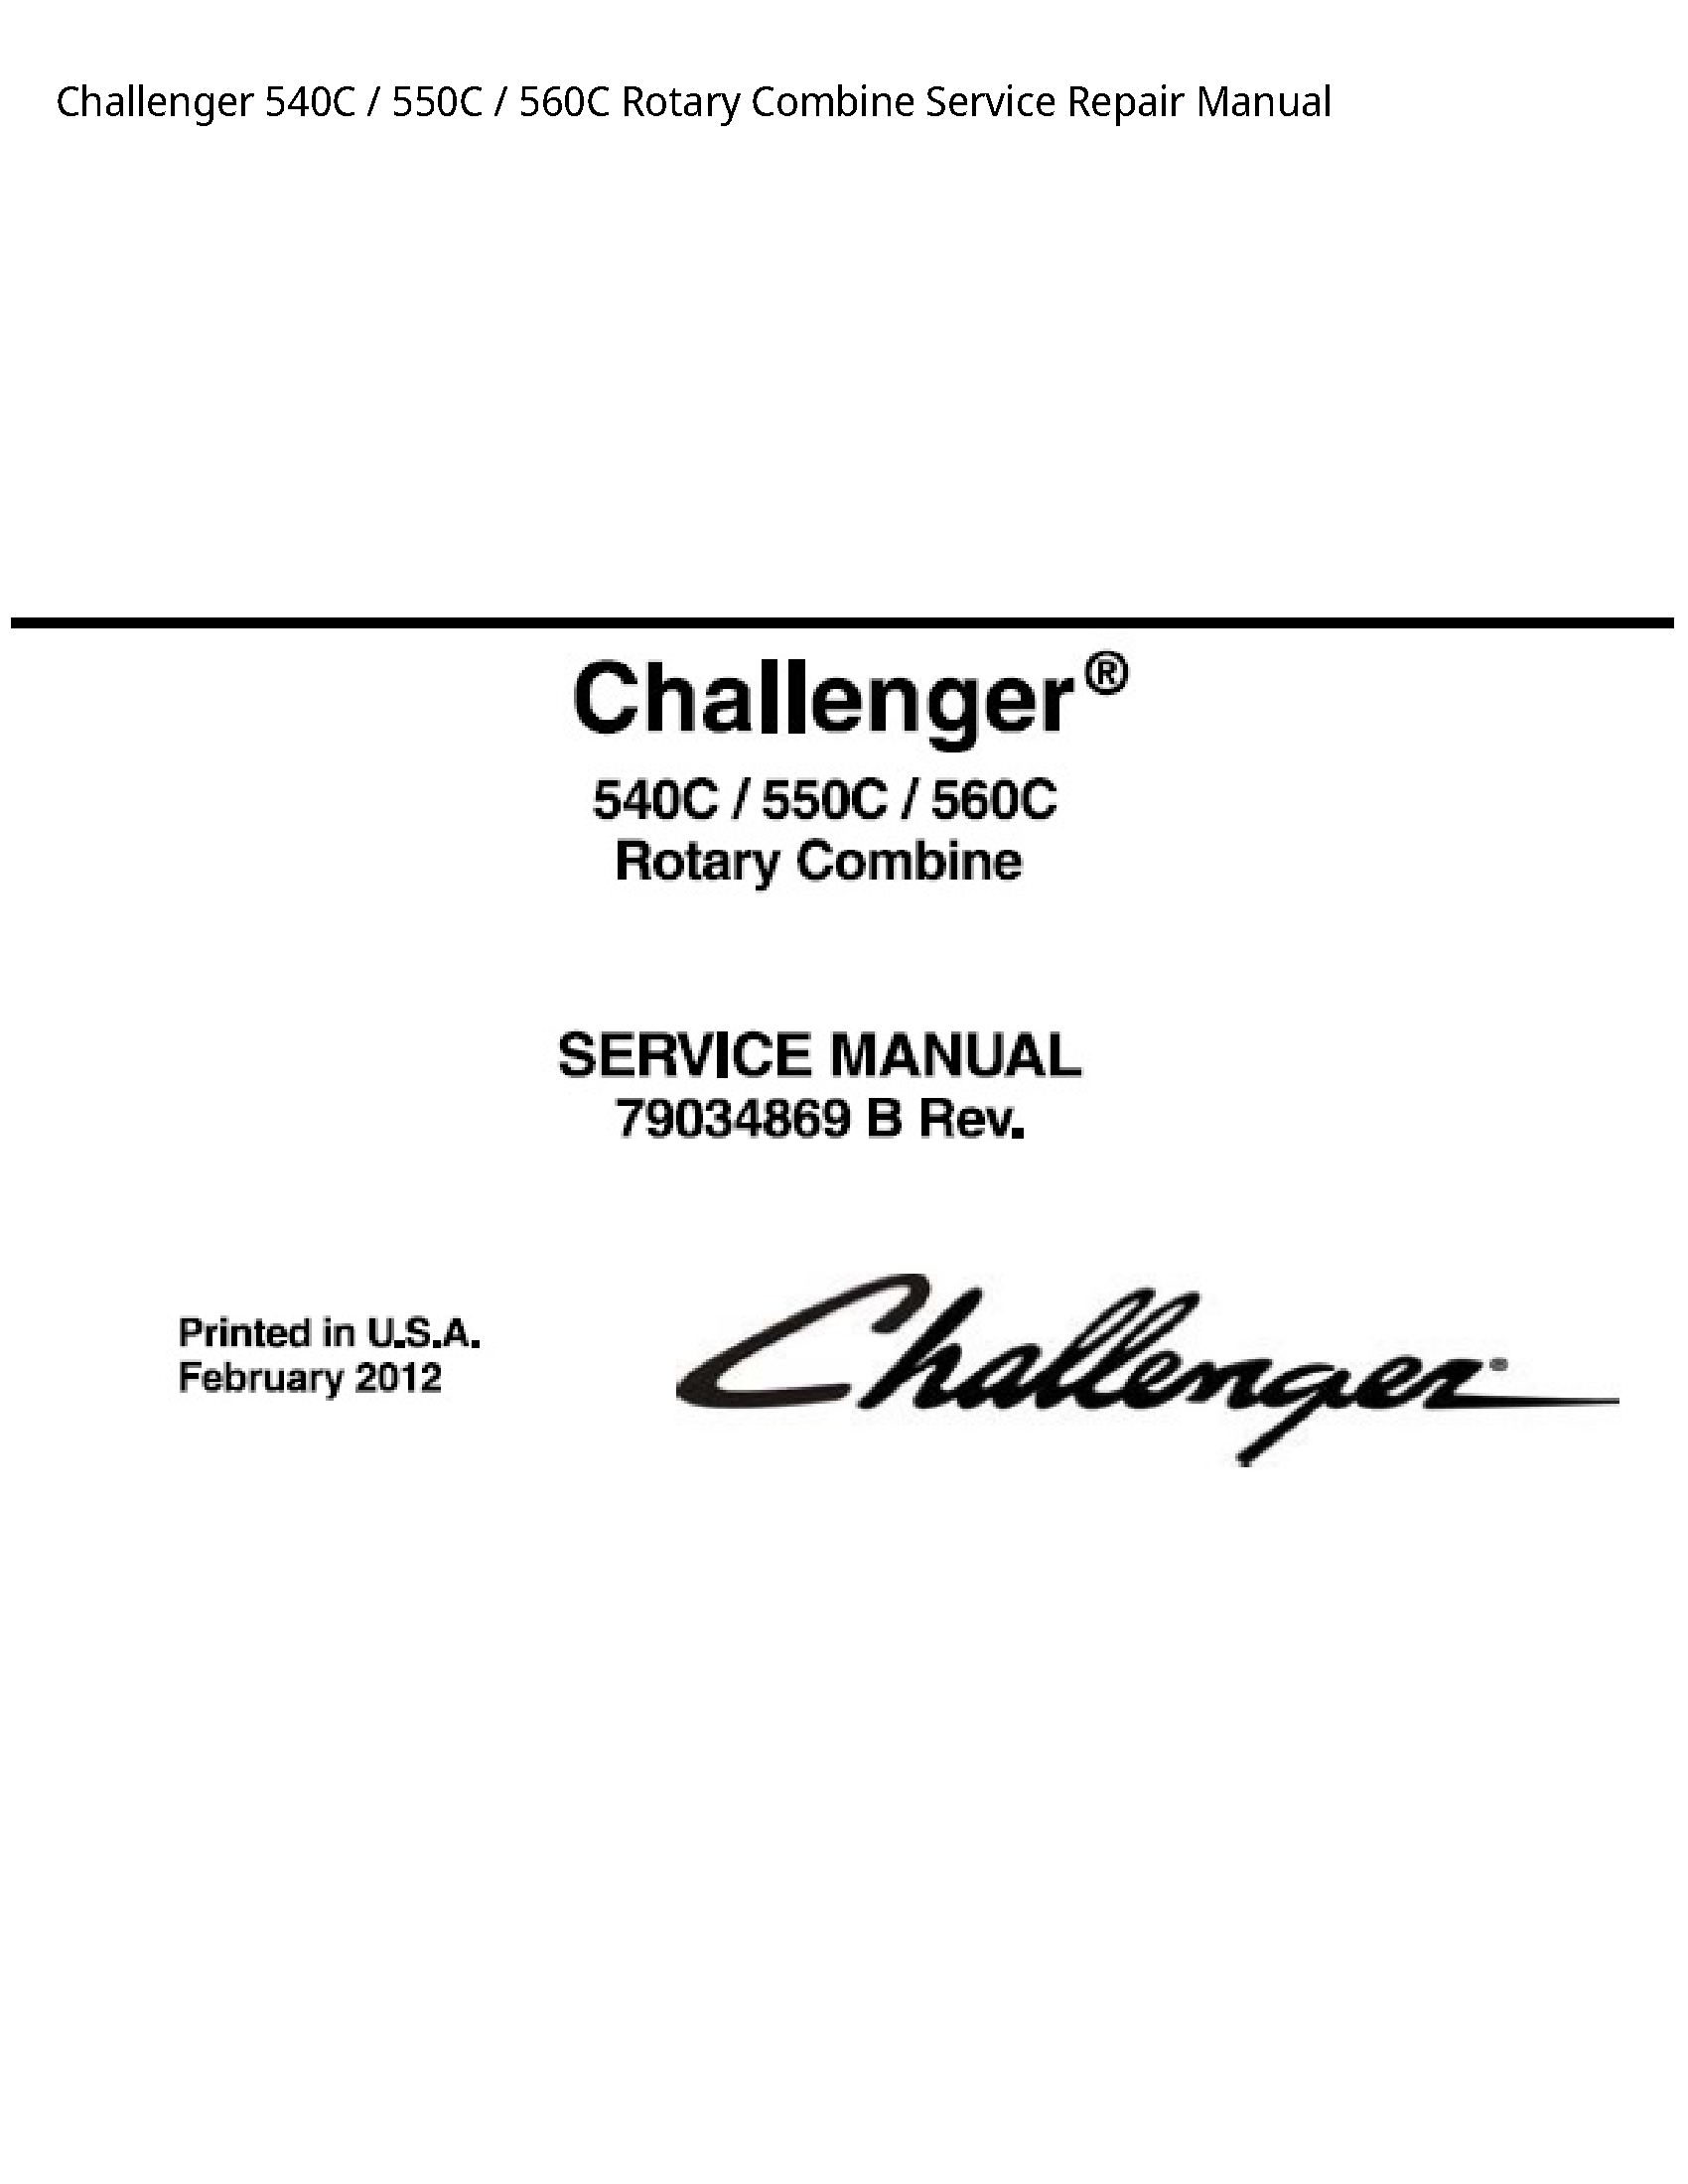 Challenger 540C Rotary Combine manual